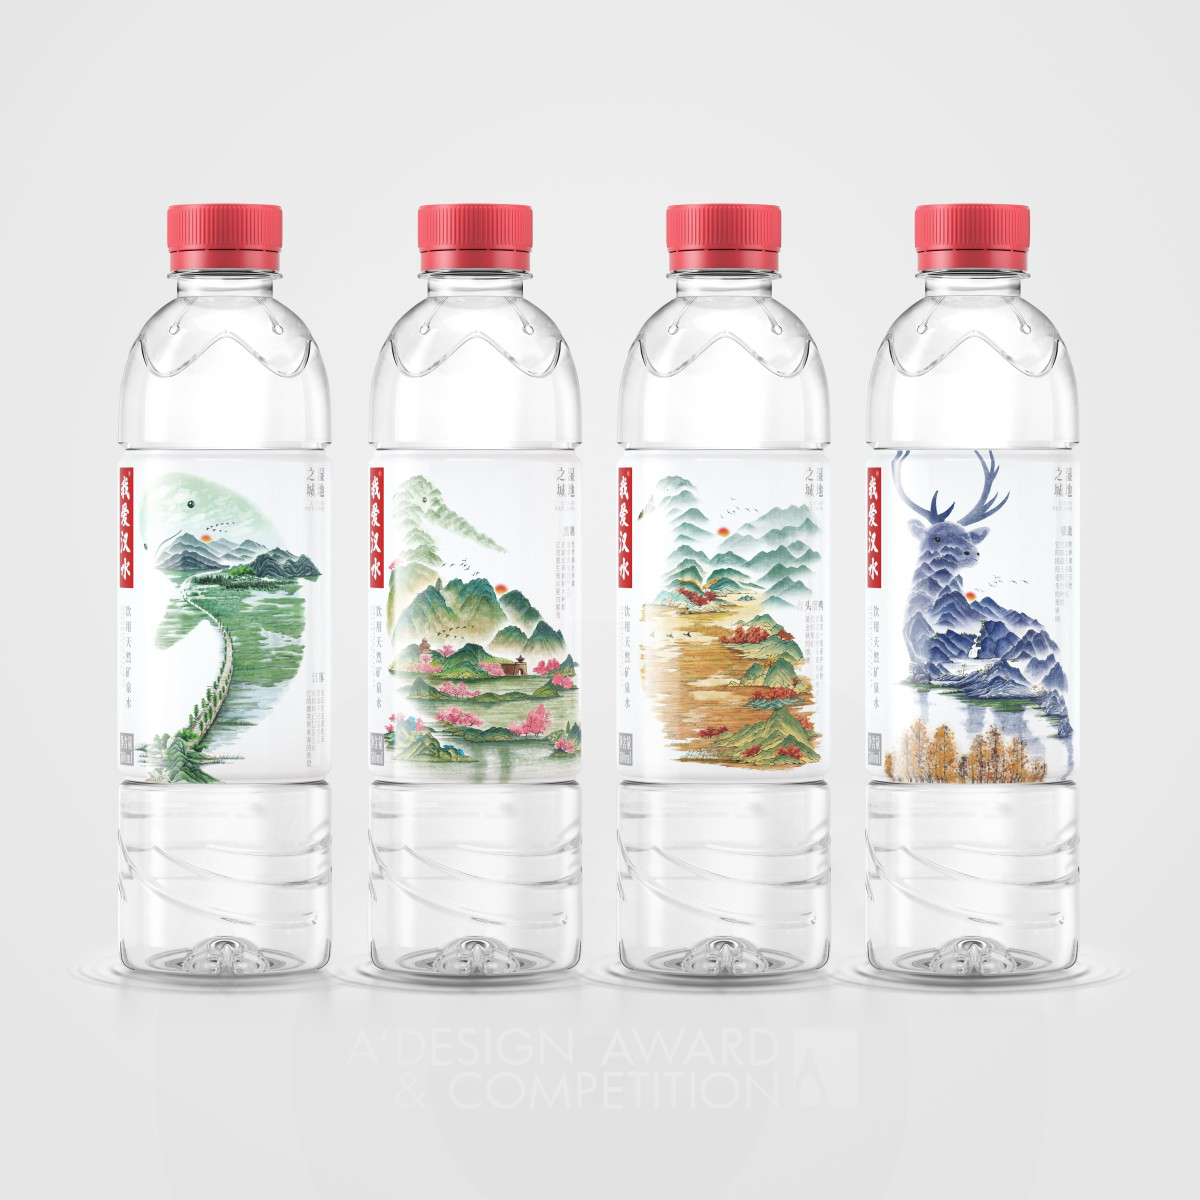 Pufine Creative wins Silver at the prestigious A' Packaging Design Award with Love Hanshui Water Packaging.